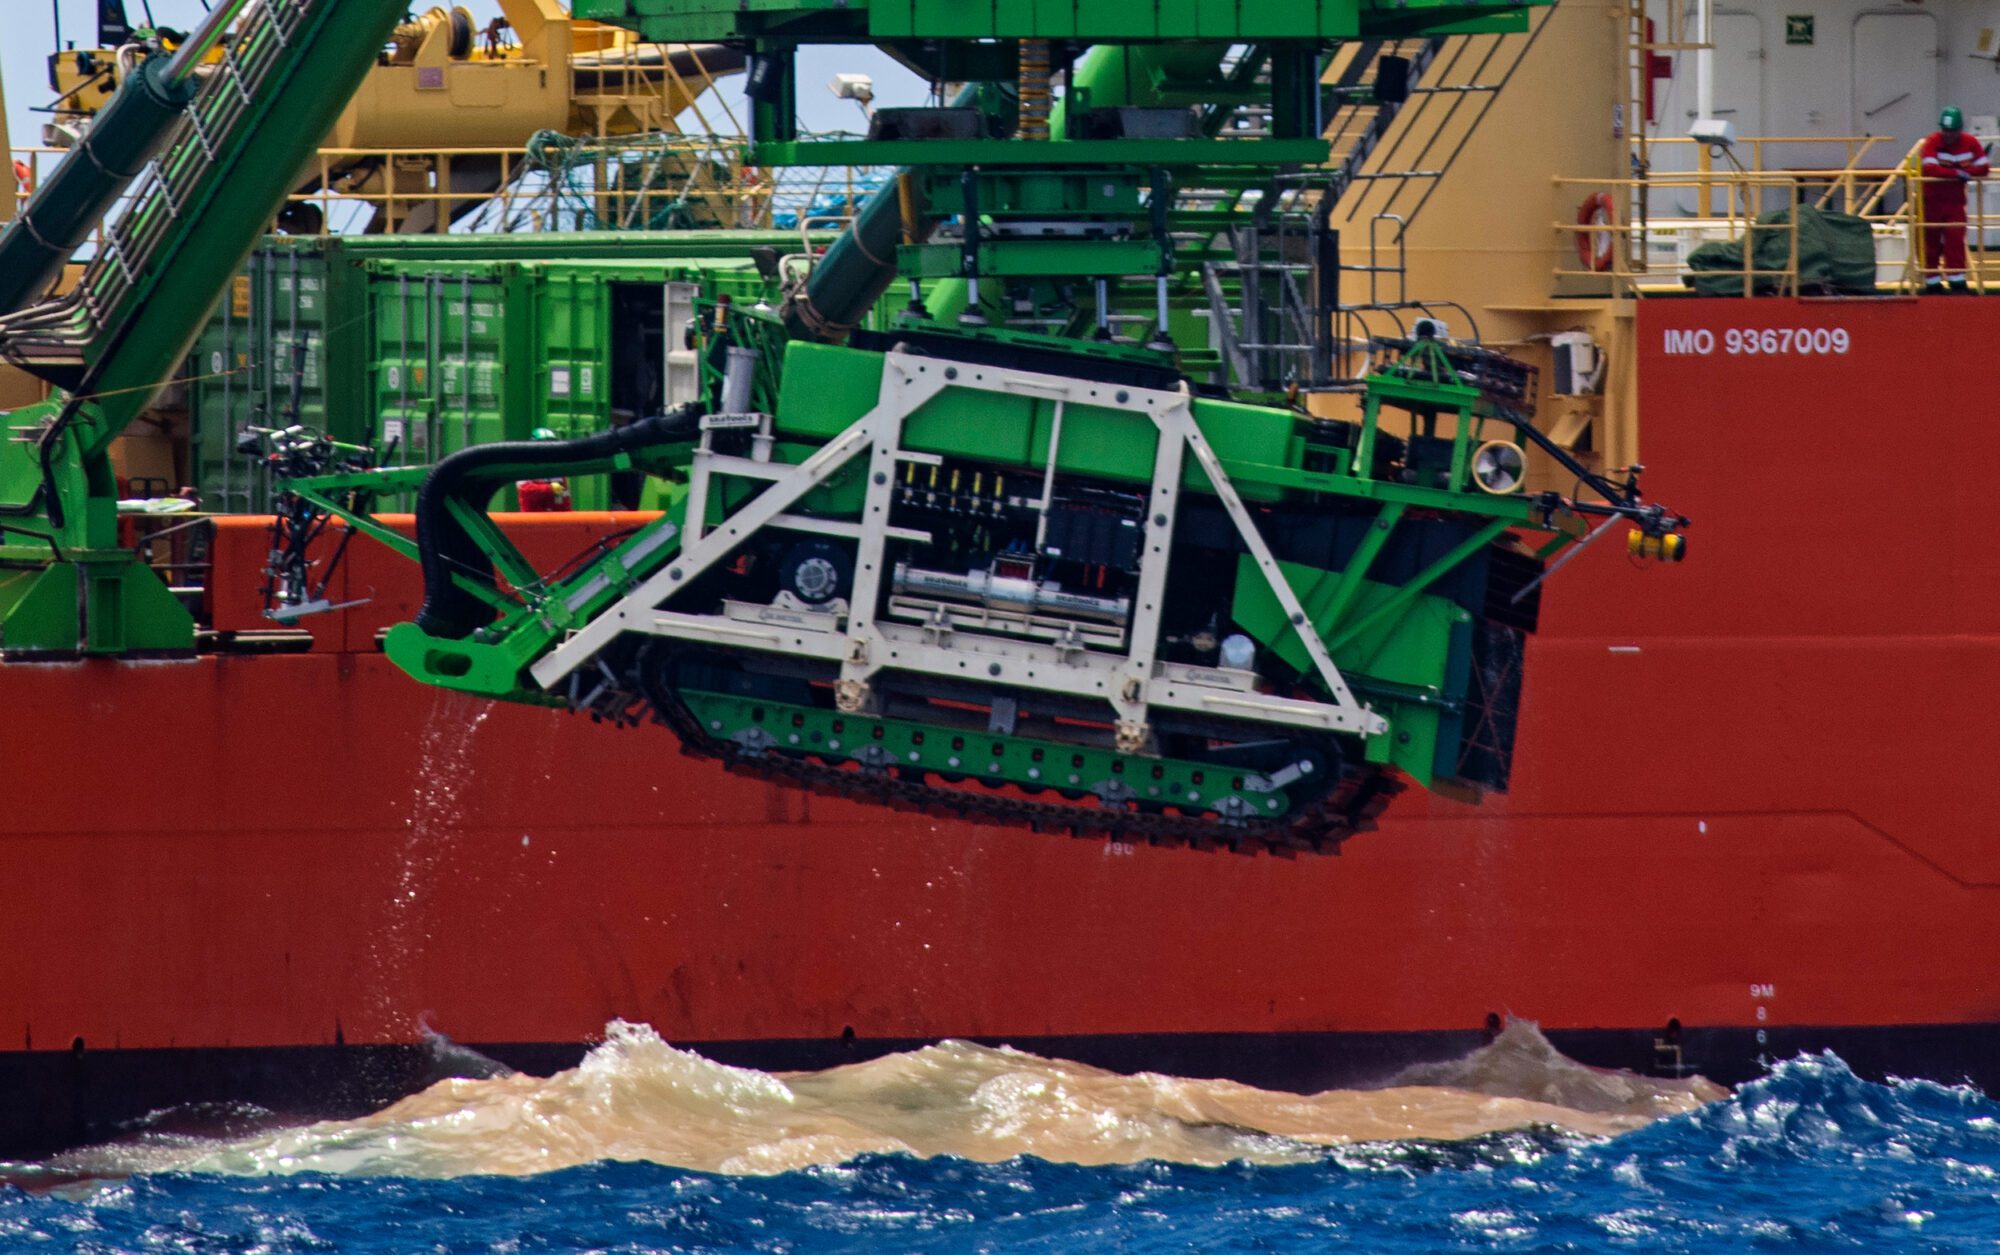 A side view of a large red ship filling the whole frame with a smaller vehicle that looks like a tank being lifted out of the ocean below. There is a large patch of yellow sediment visible in the dark blue water just below the machinery